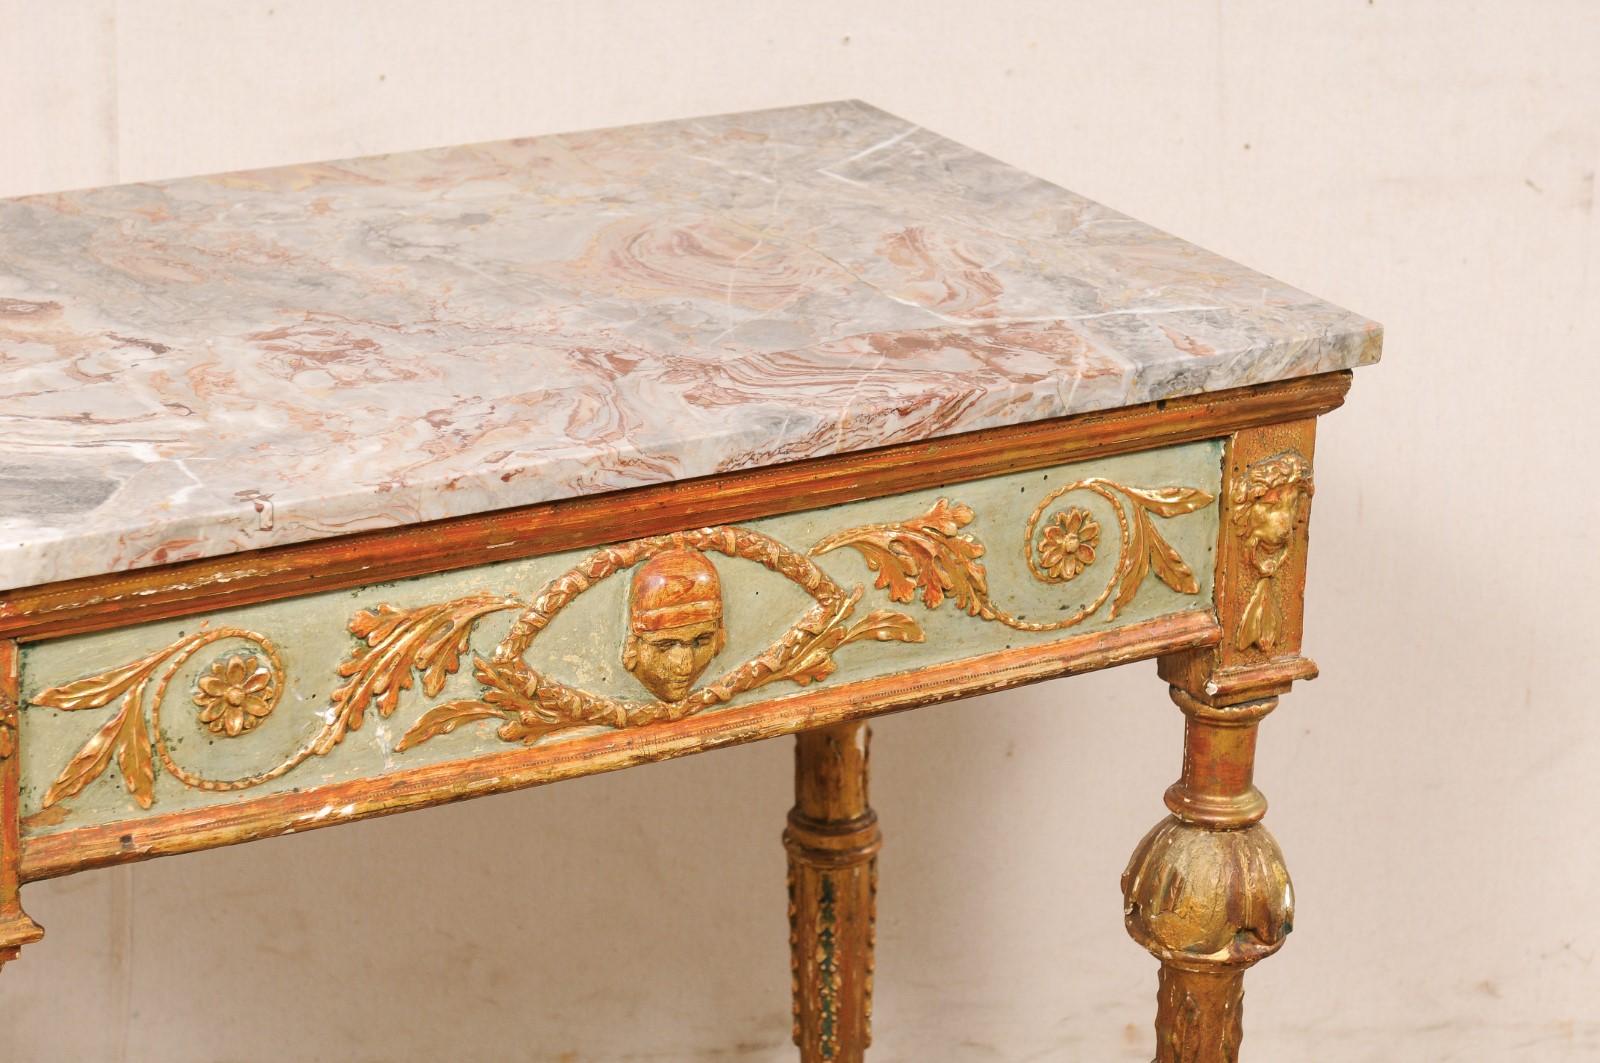 Neoclassical 18th Century Neoclassic Italian Carved & Painted Wood Console with Marble